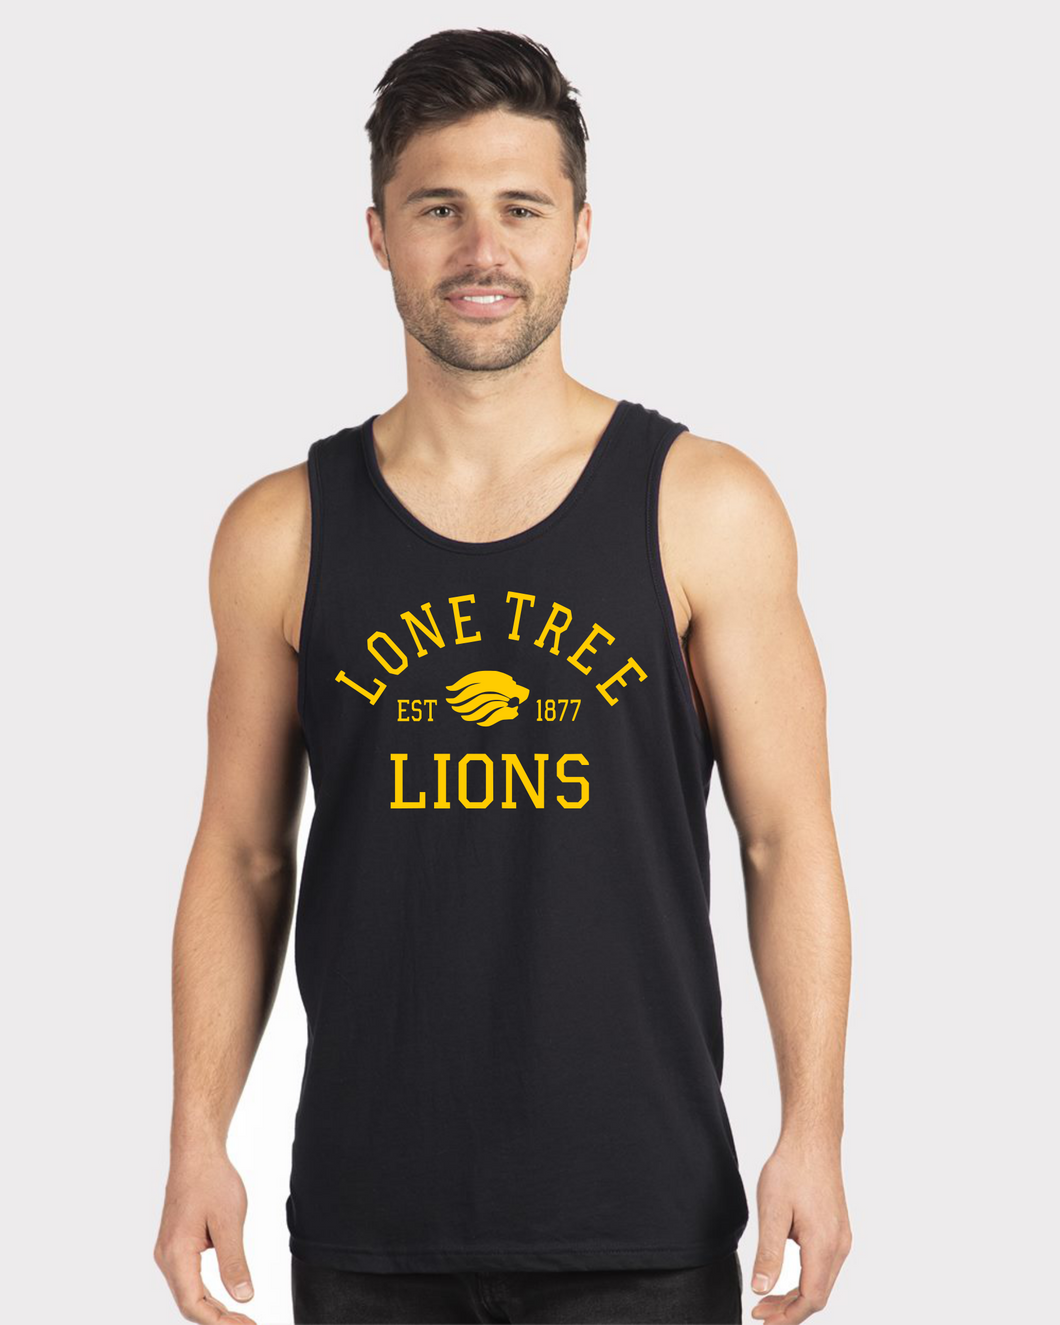 Lone Tree Established Tank (Youth and Women's Adult and Unisex Muscle)